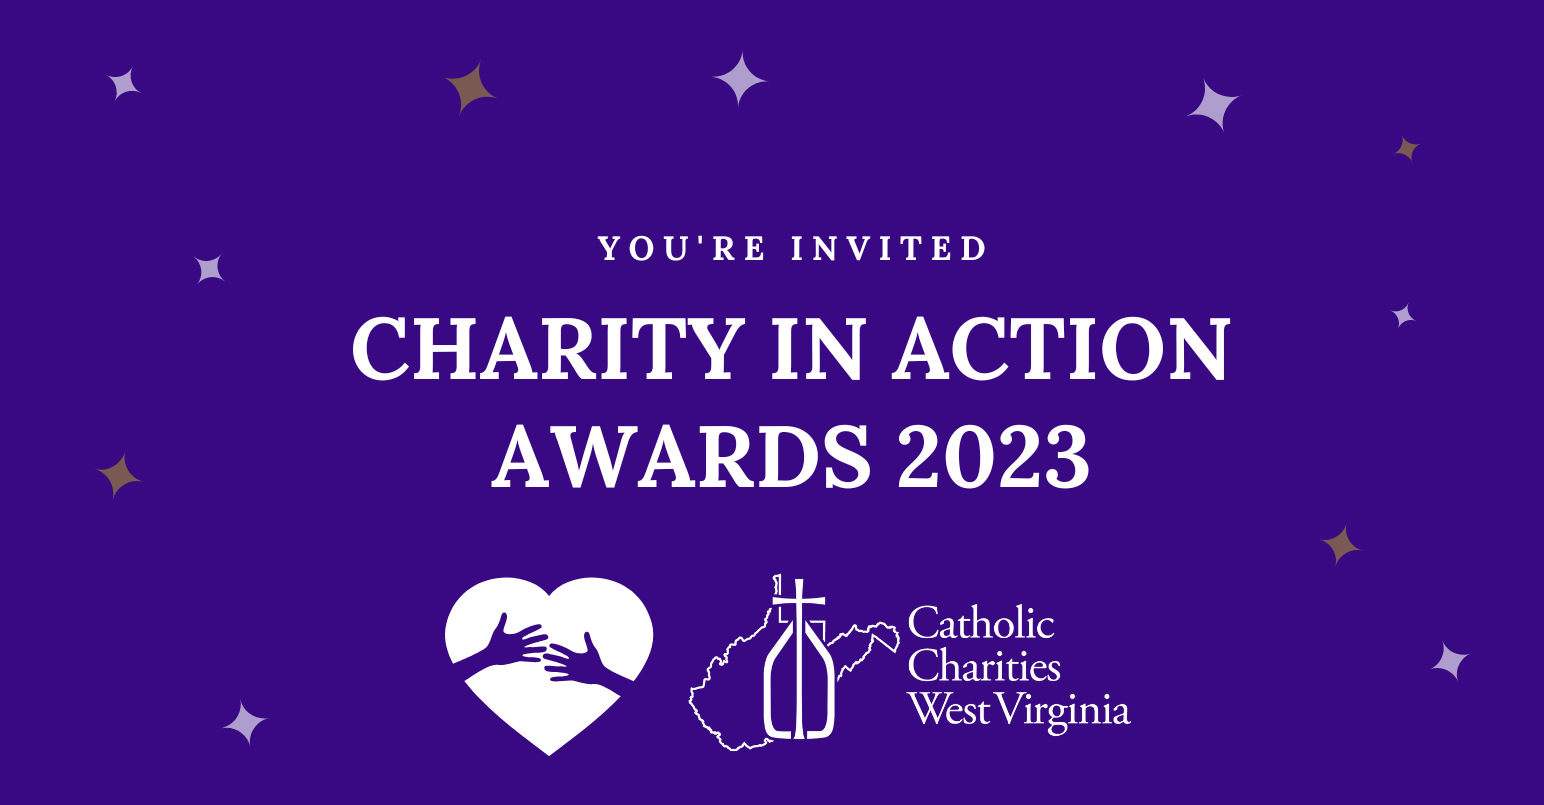 Charity in Action Awards